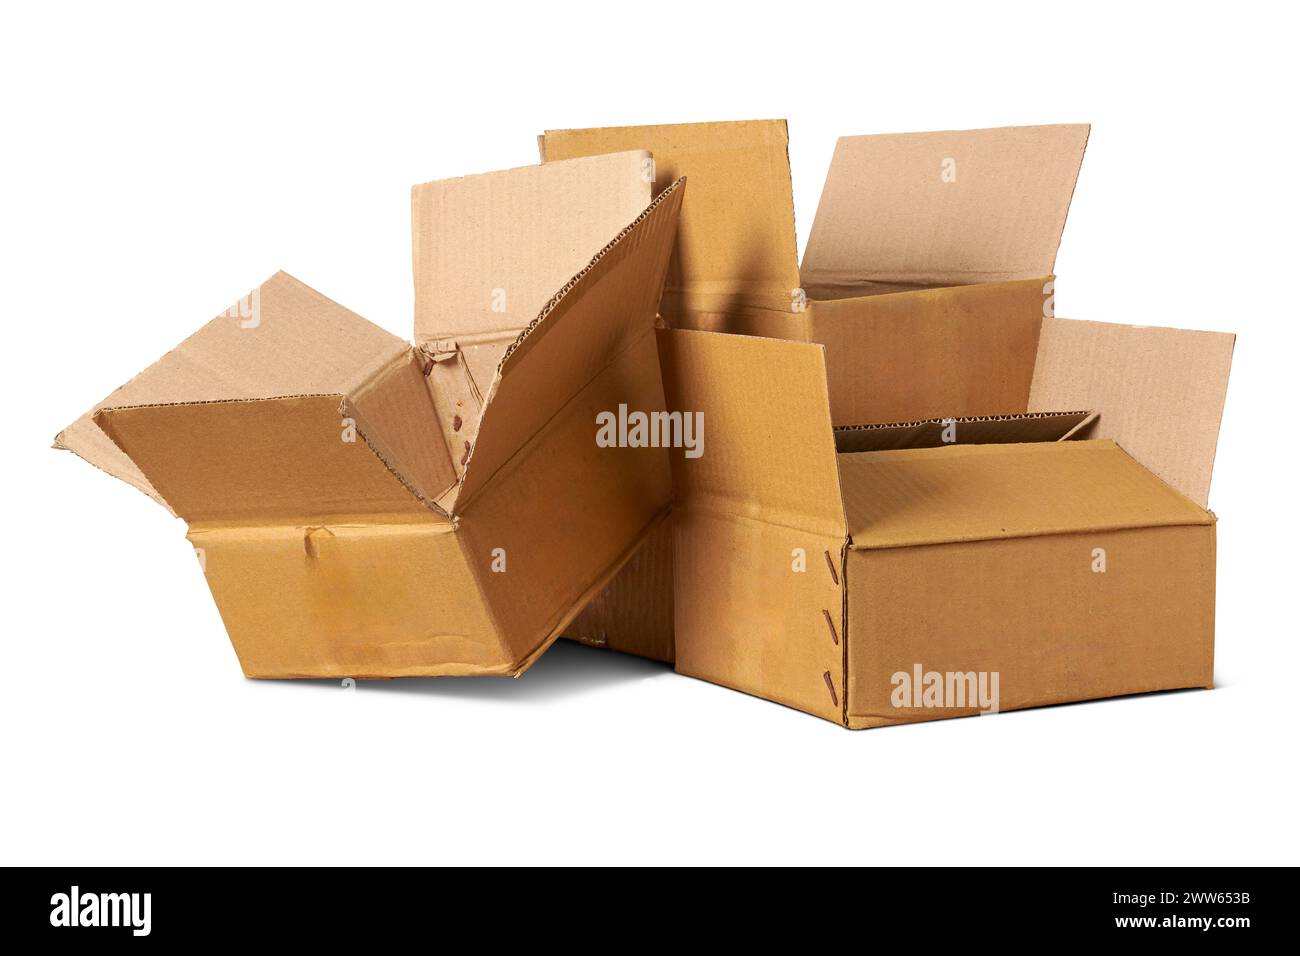 blank corrugated cardboard boxes used in packaging for shipping, storing and protecting, eco-friendly recyclable, biodegradable sustainable choice Stock Photo